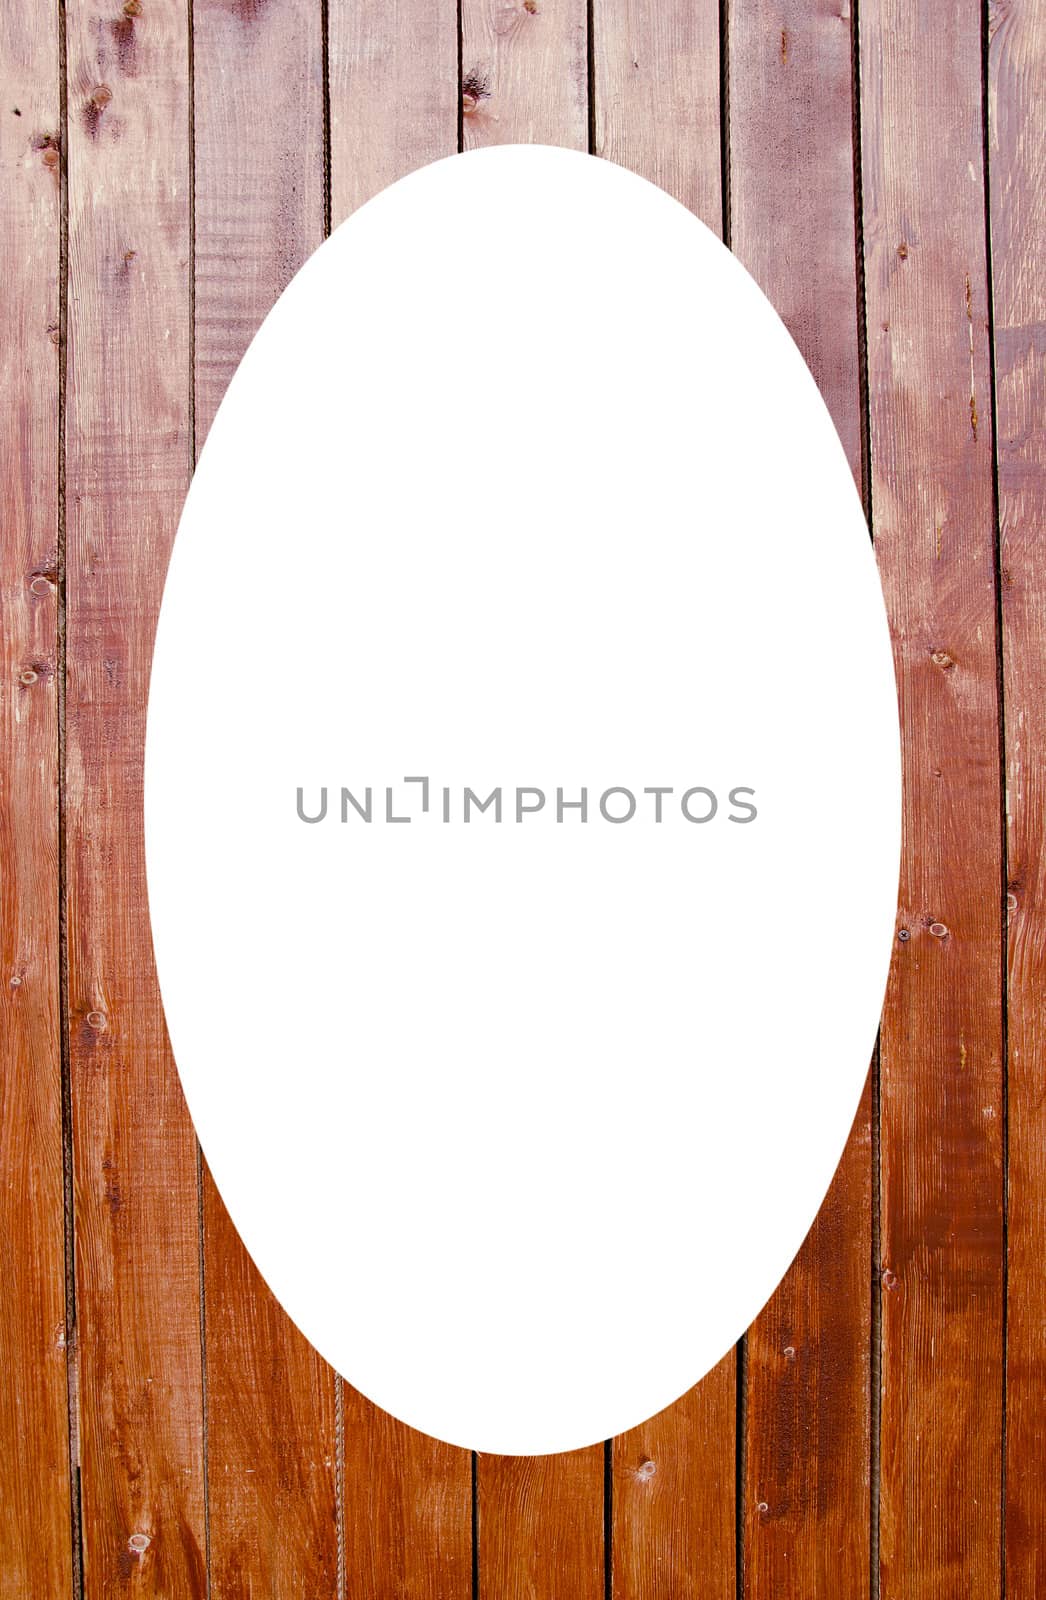 Isolated white oval place for text photograph image in center of frame. Wall of narrow brown painted planks. Wooden architectural background.